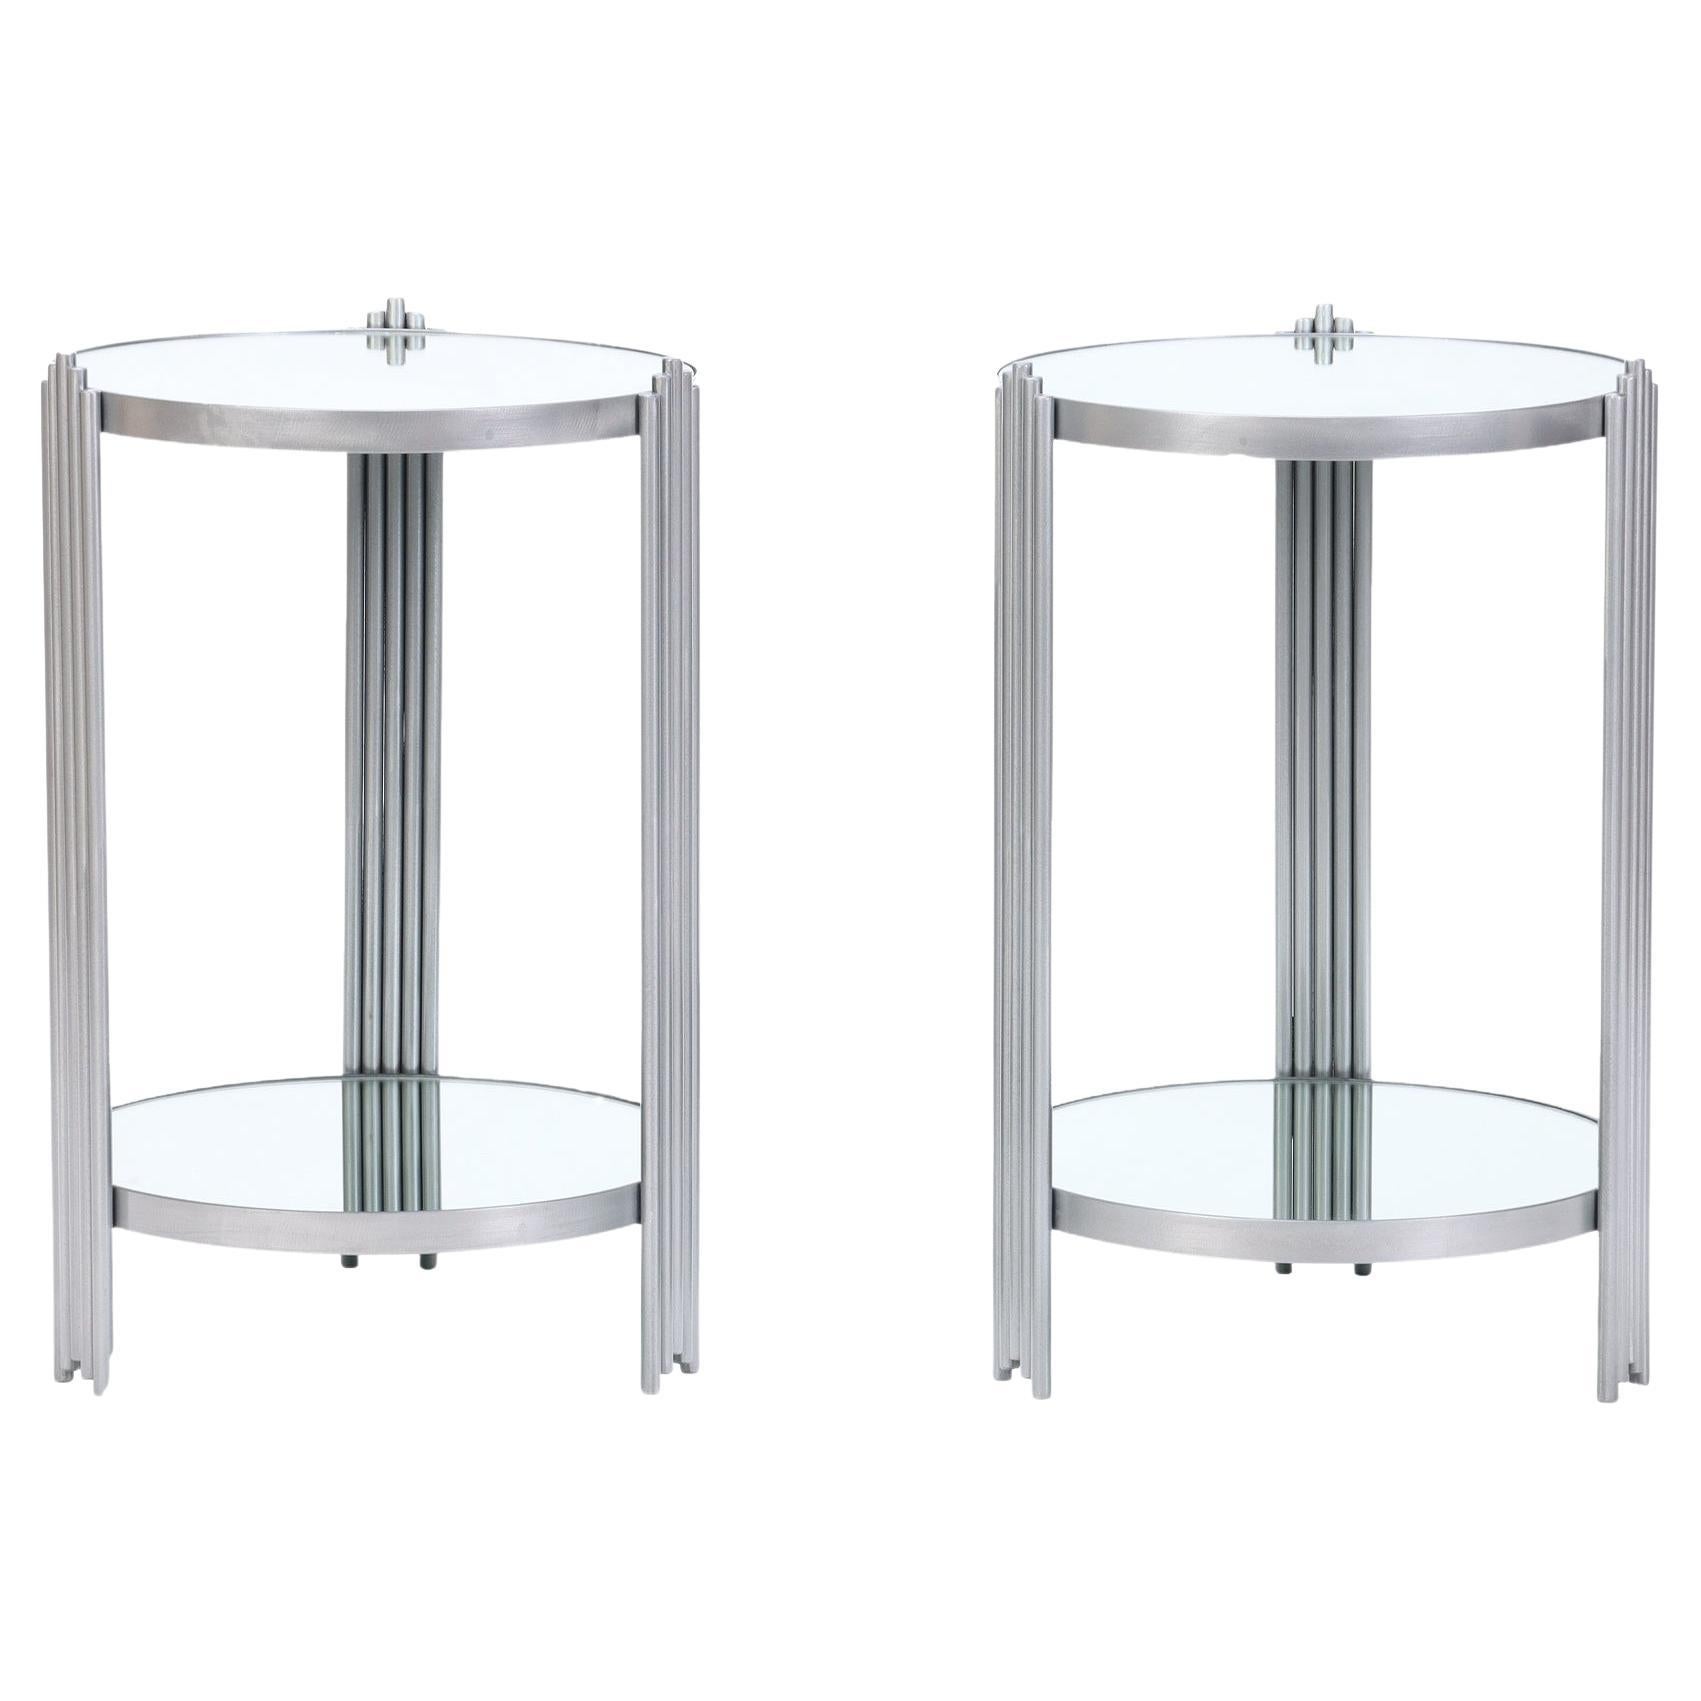 Pair of Art Deco Style Round End Tables with Mirrored Tops, Contemporary